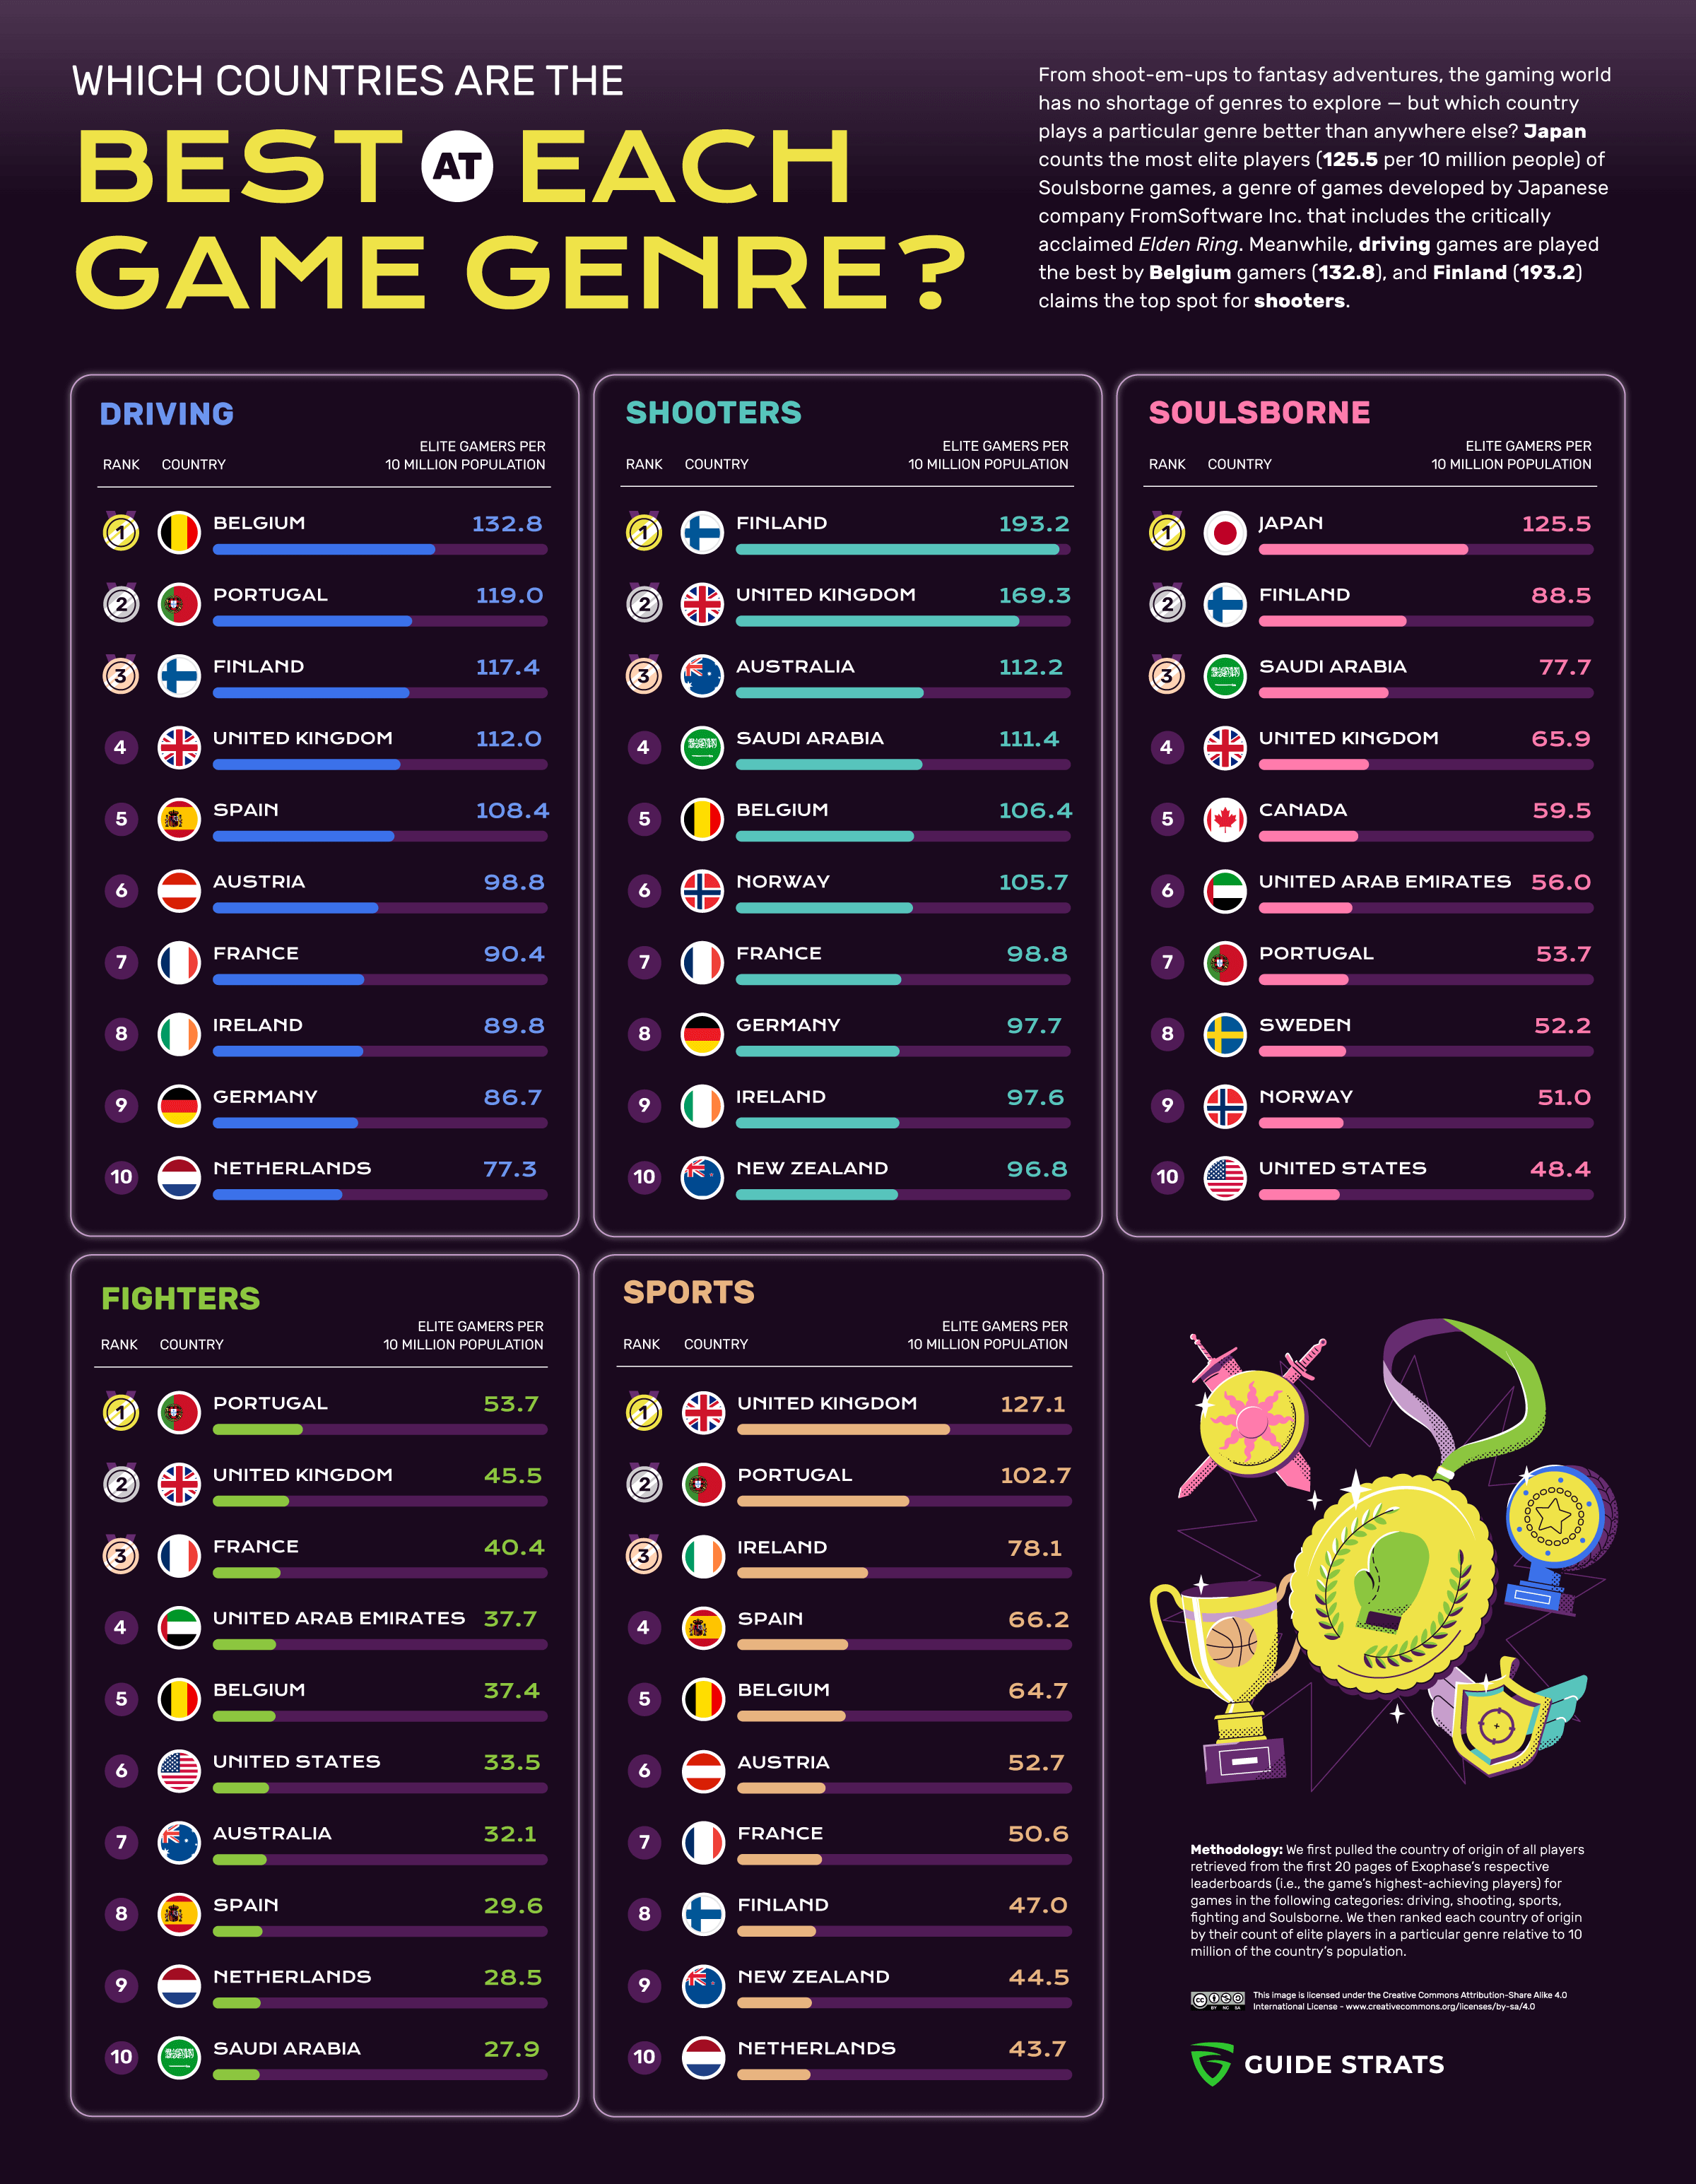 The Countries Best at Each Game Genre (Infographic)